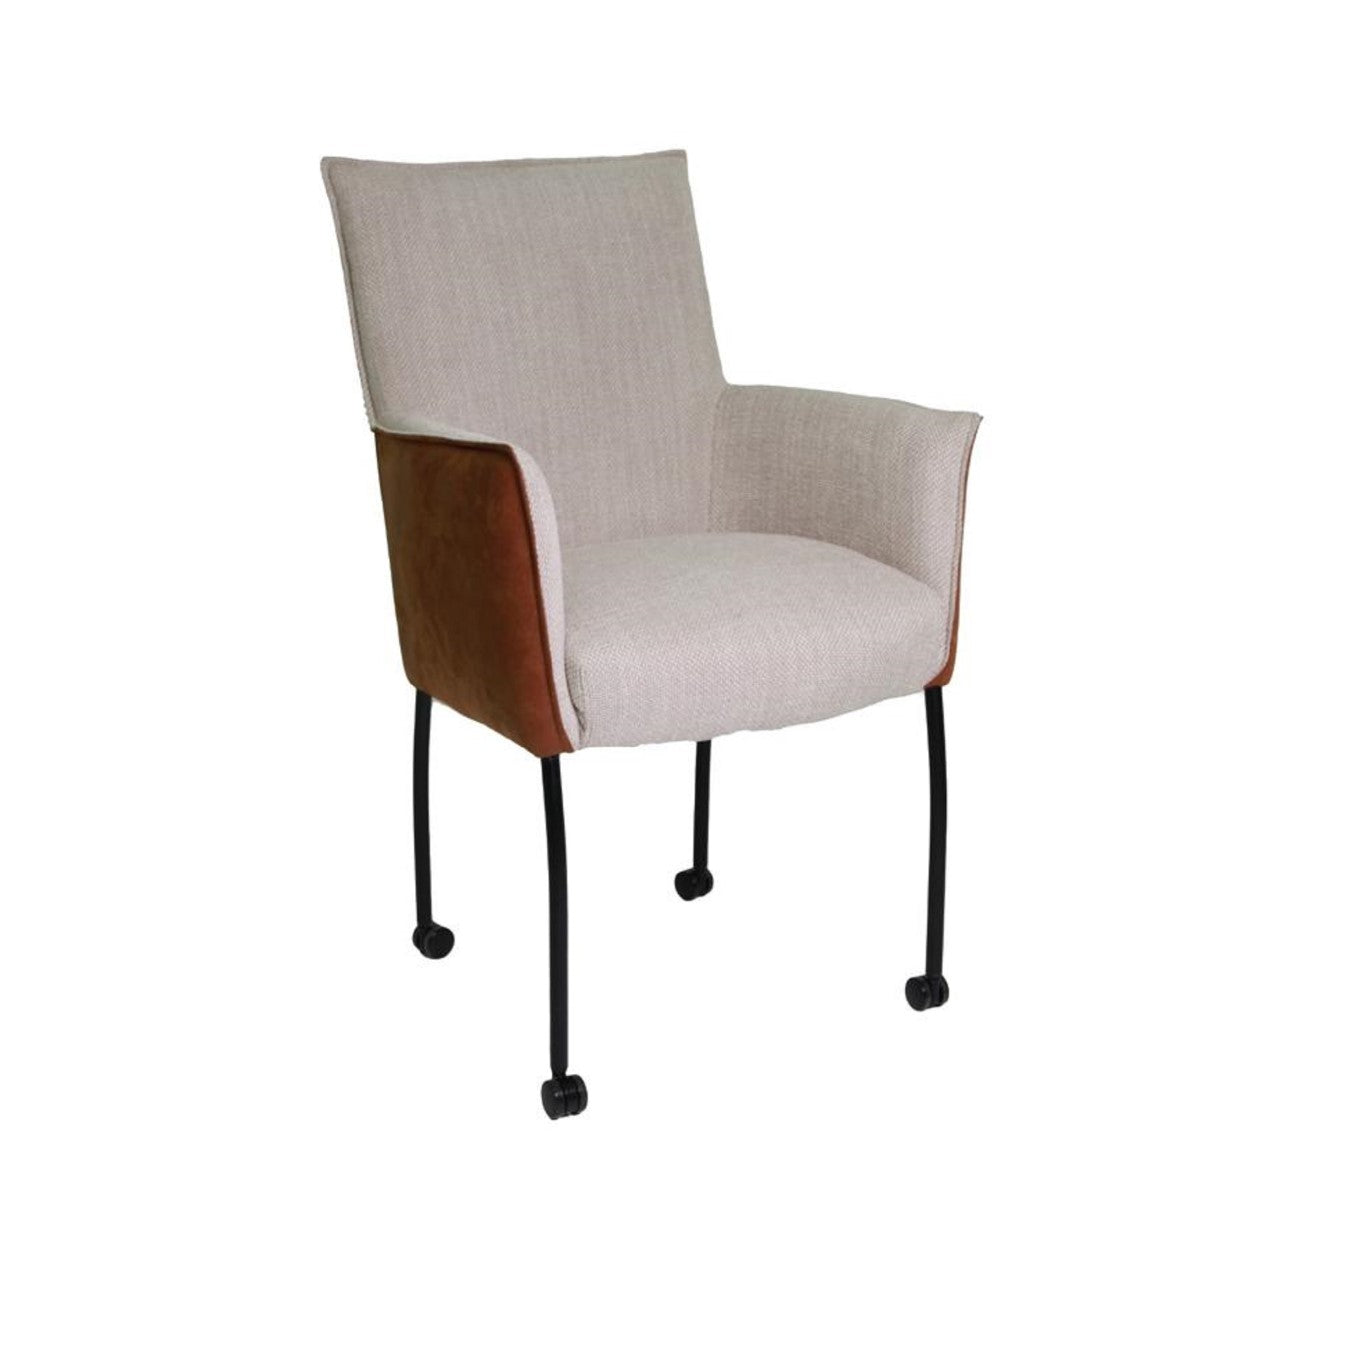 Dining chair made of fabric and genuine leather SPRING ROLLS